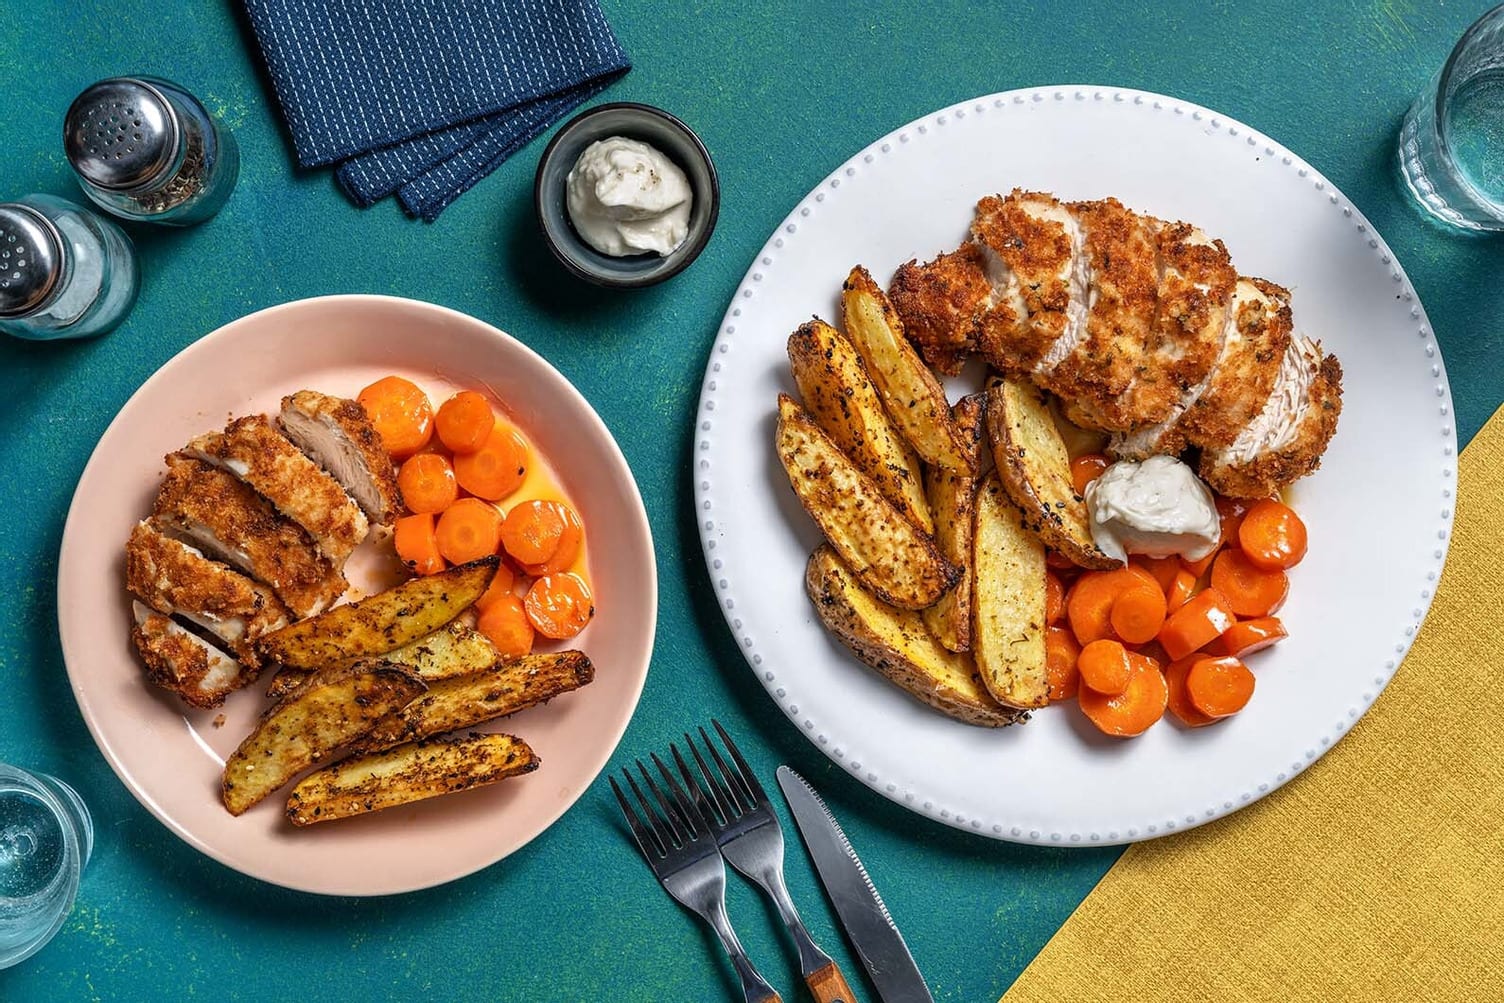 FRESH CHEF™ Chicken Recipe with Peas and Carrots